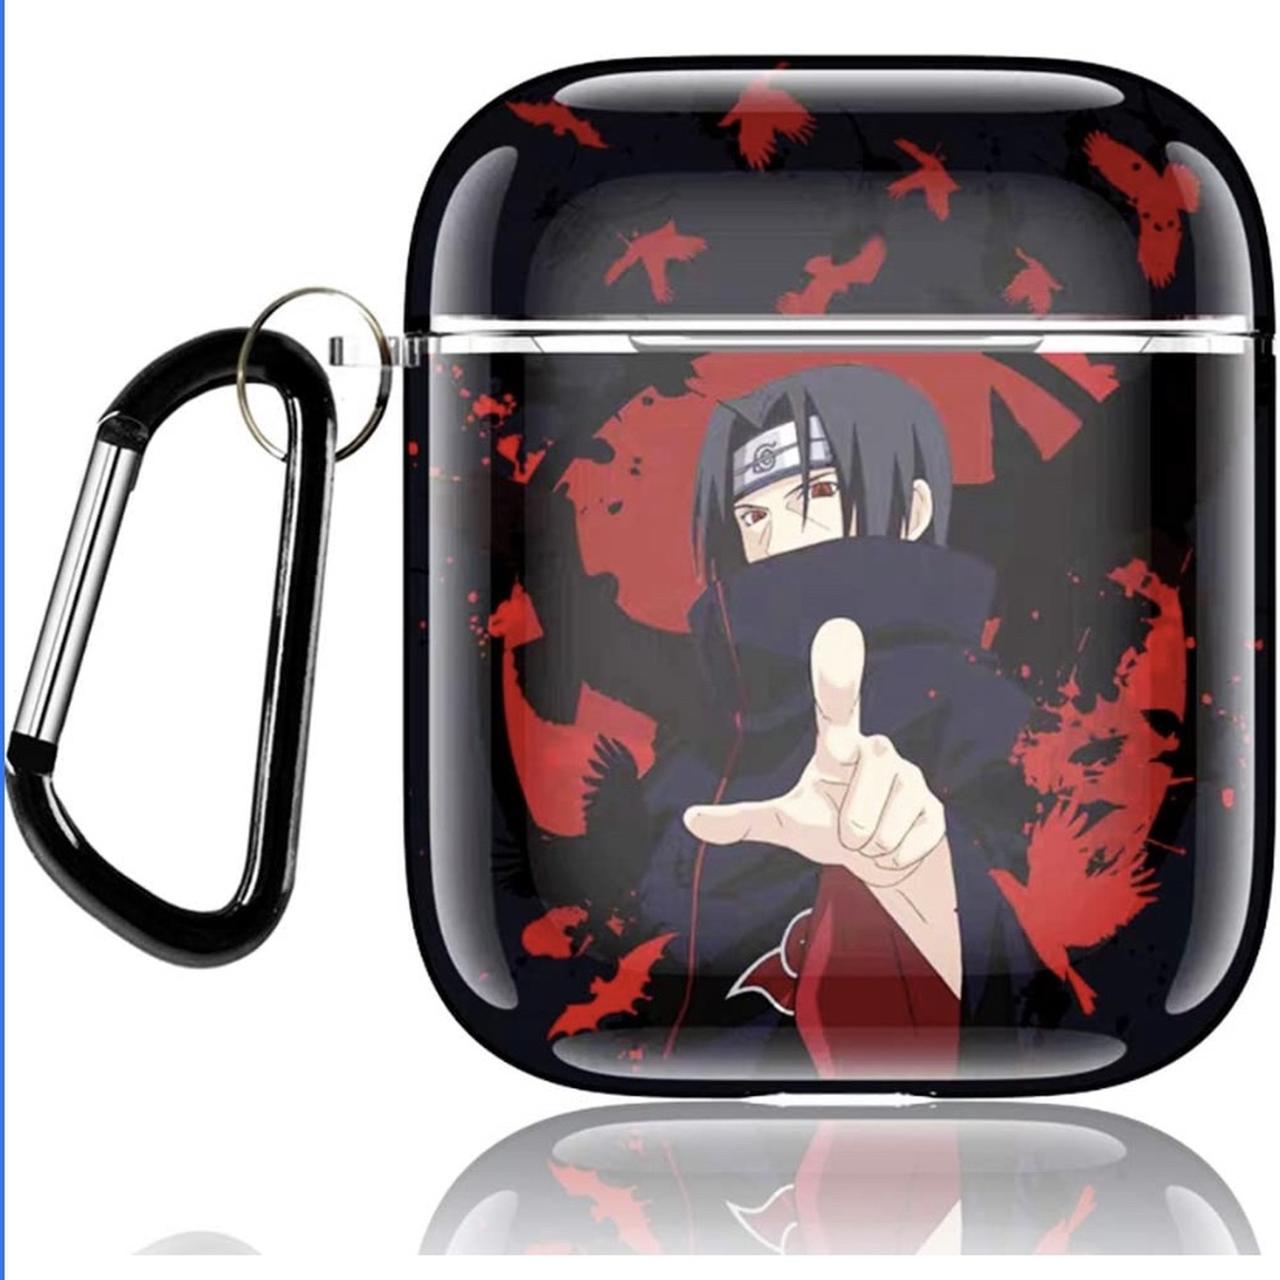 Anime One Piece Airpod Case Cover for Airpod 1 2 3 Pro | eBay